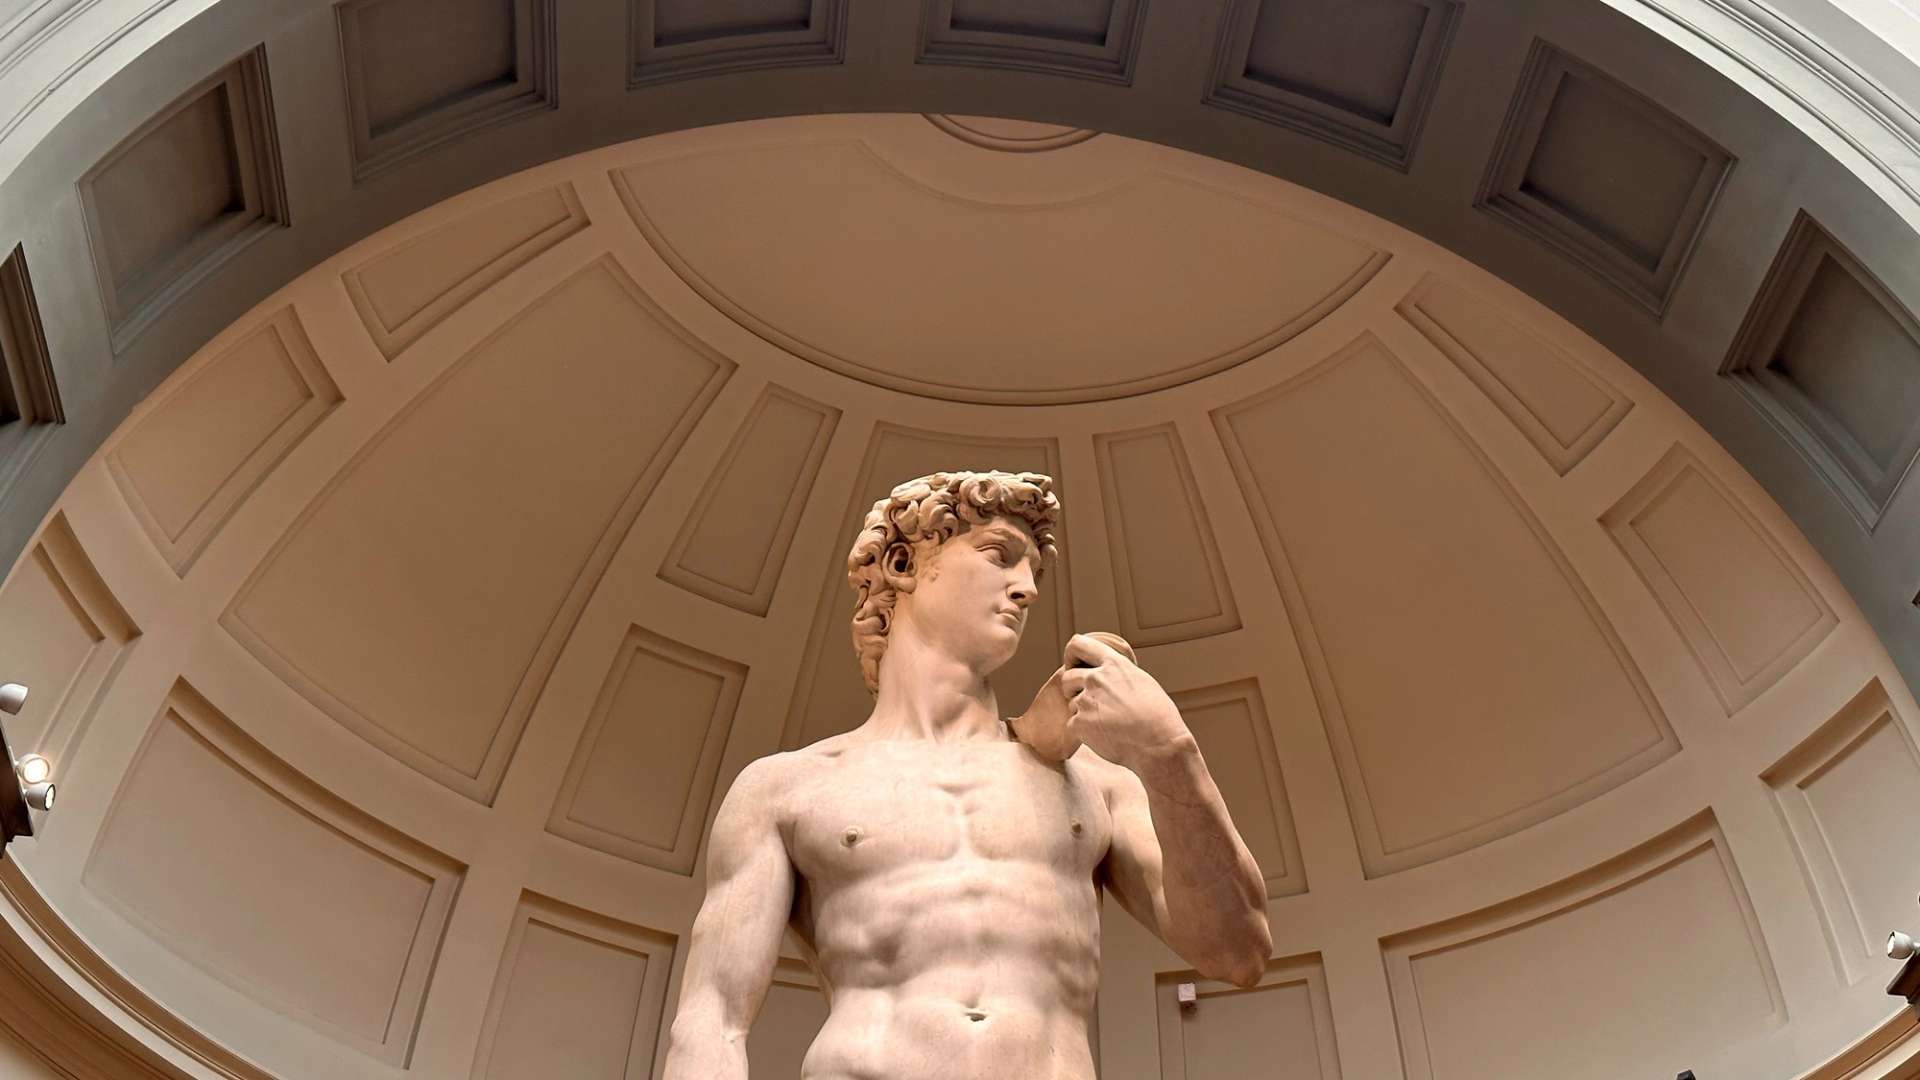 The David is a must-see monument for any group of friends on a luxury vacation to Italy